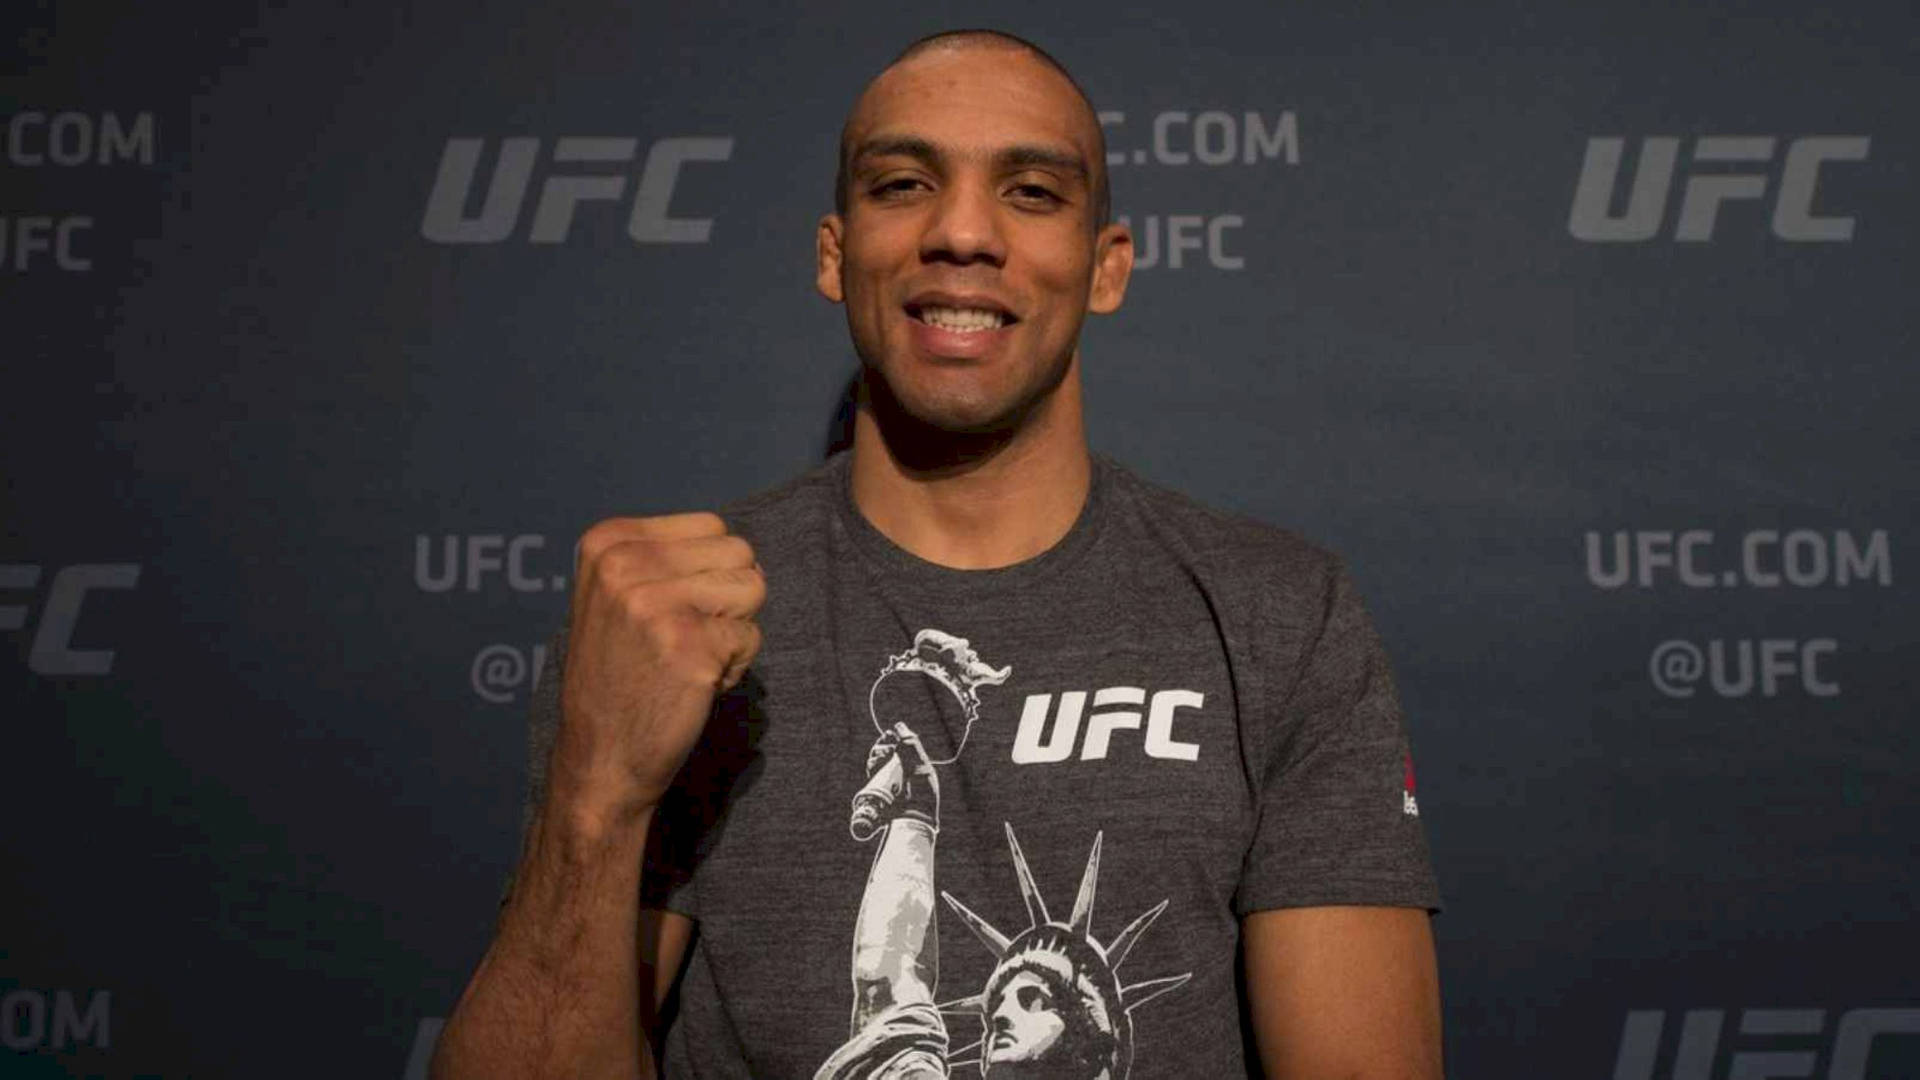 "Powerful fighter Edson Barboza raising his fist in victory" Wallpaper